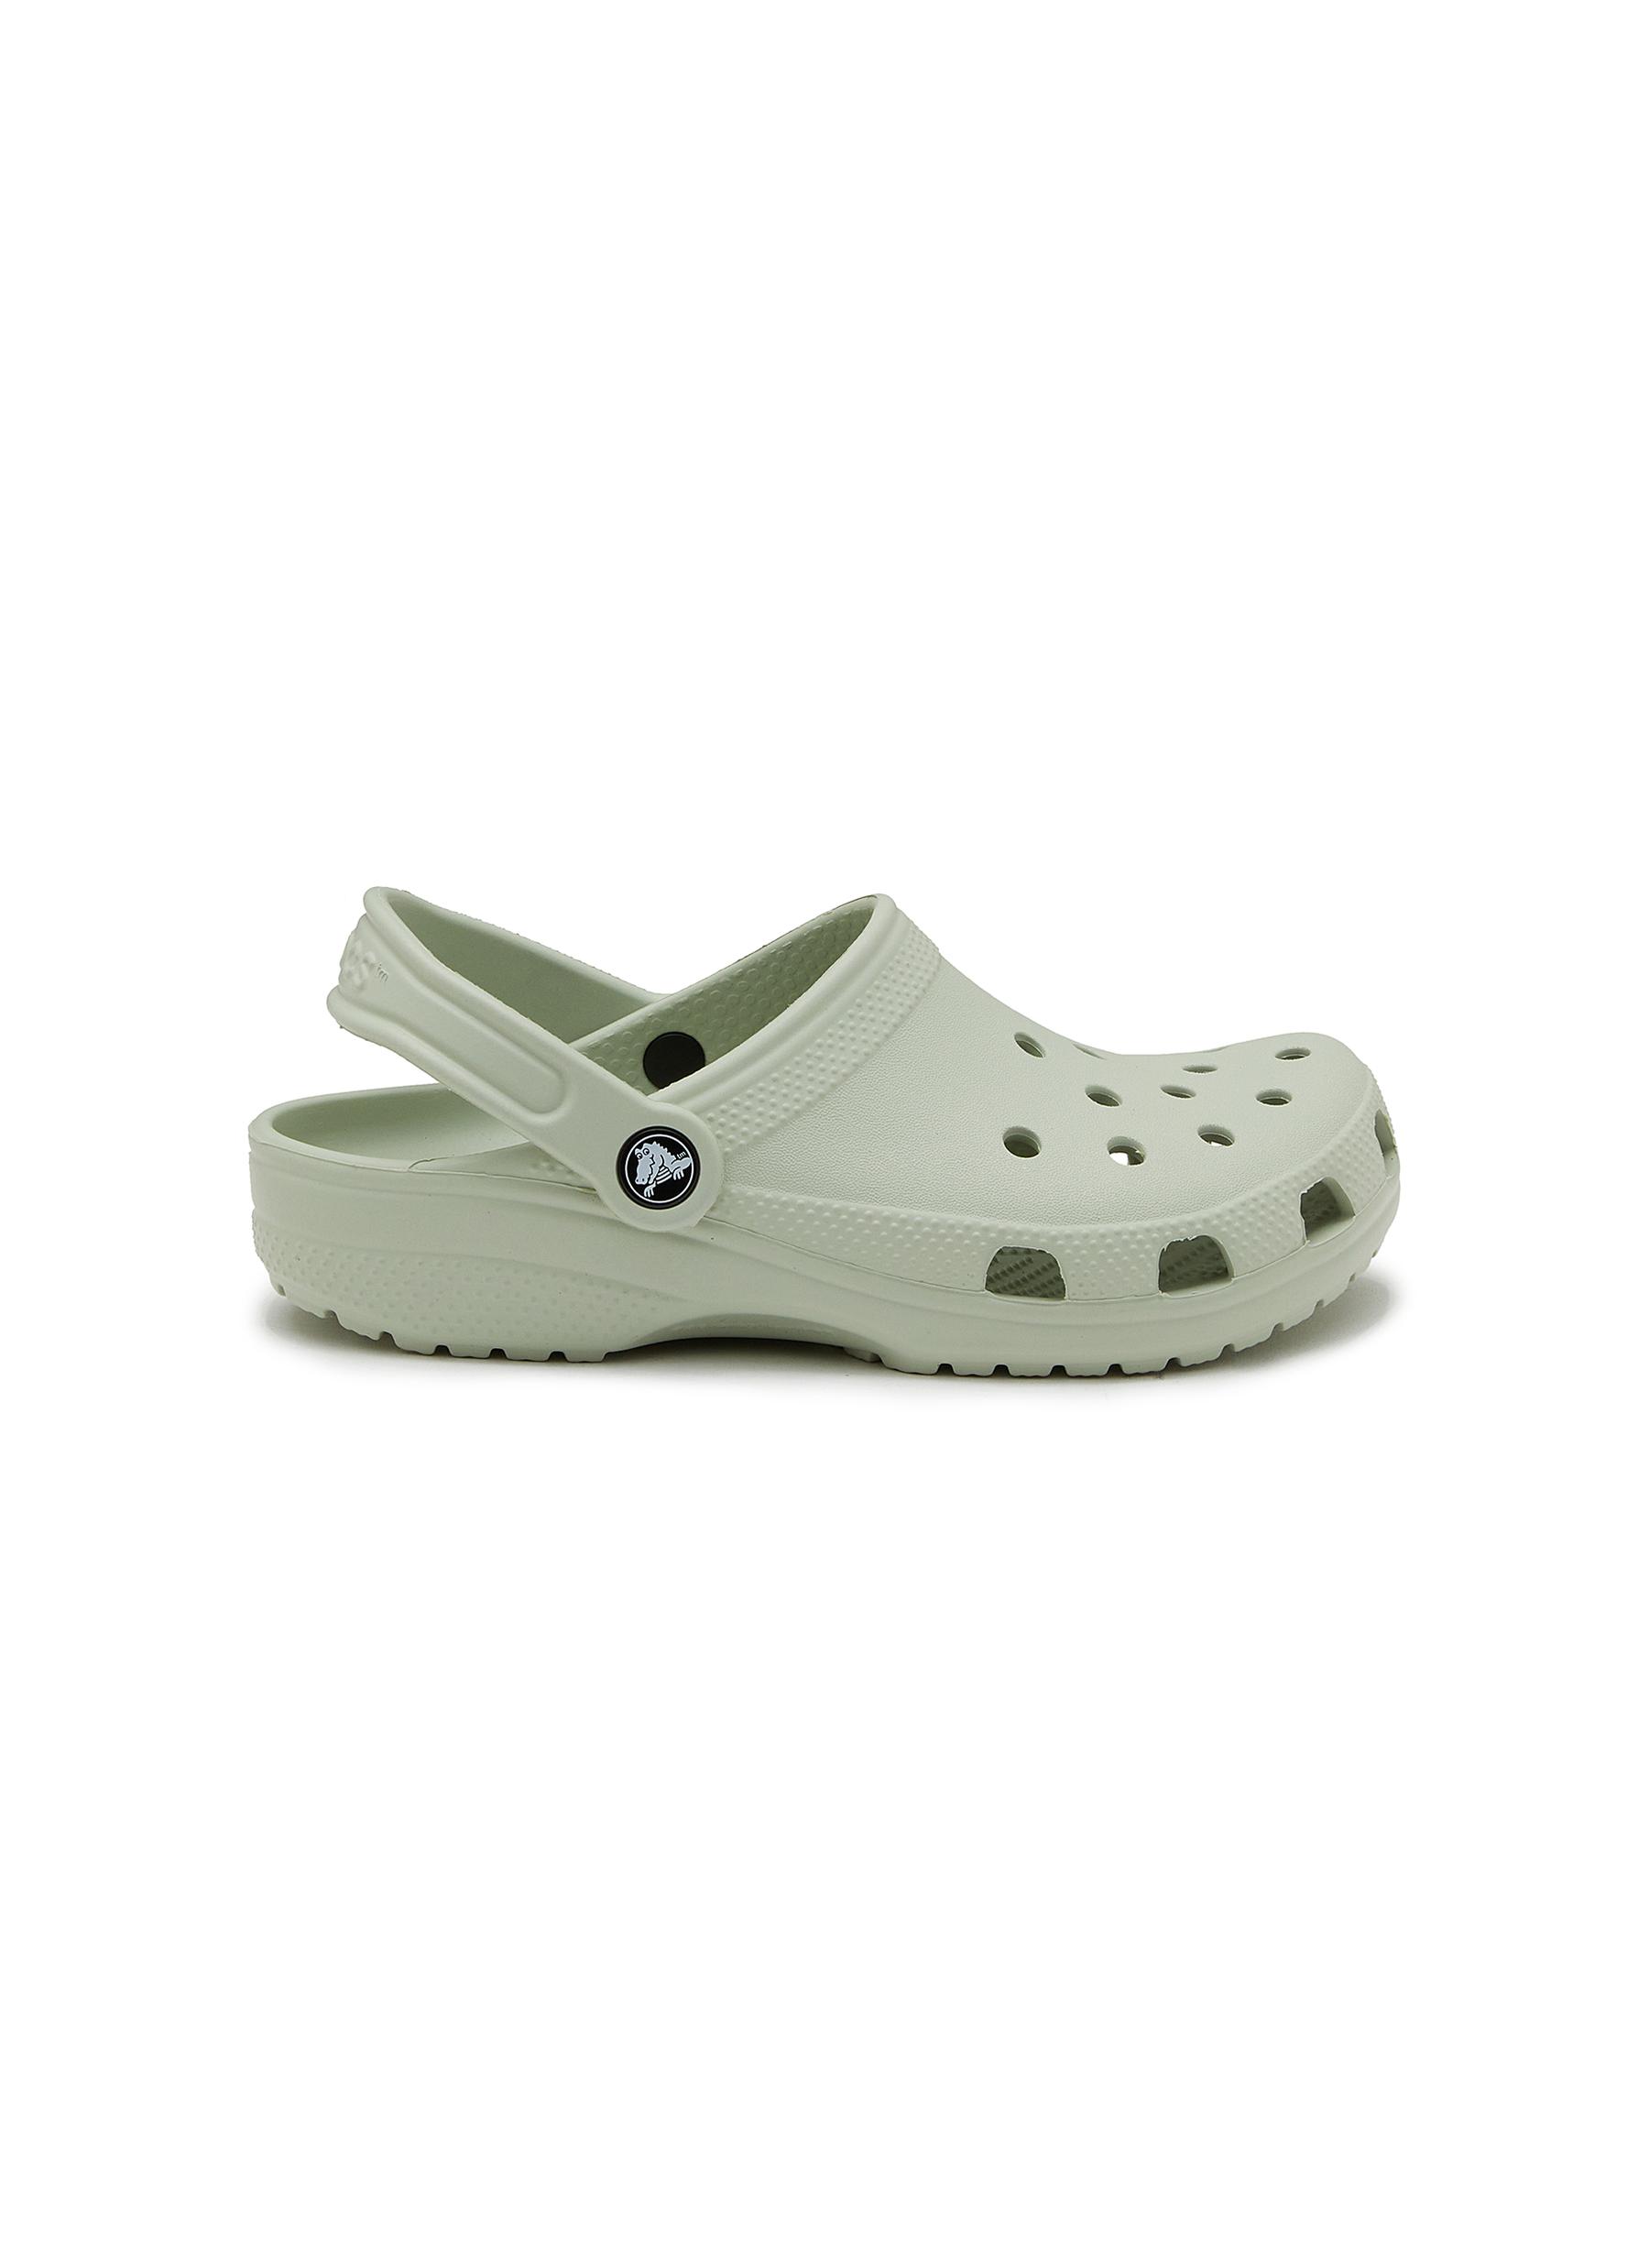 WOMENS CROCS CLASSIC LINED CLOGS | Boathouse Footwear Collective